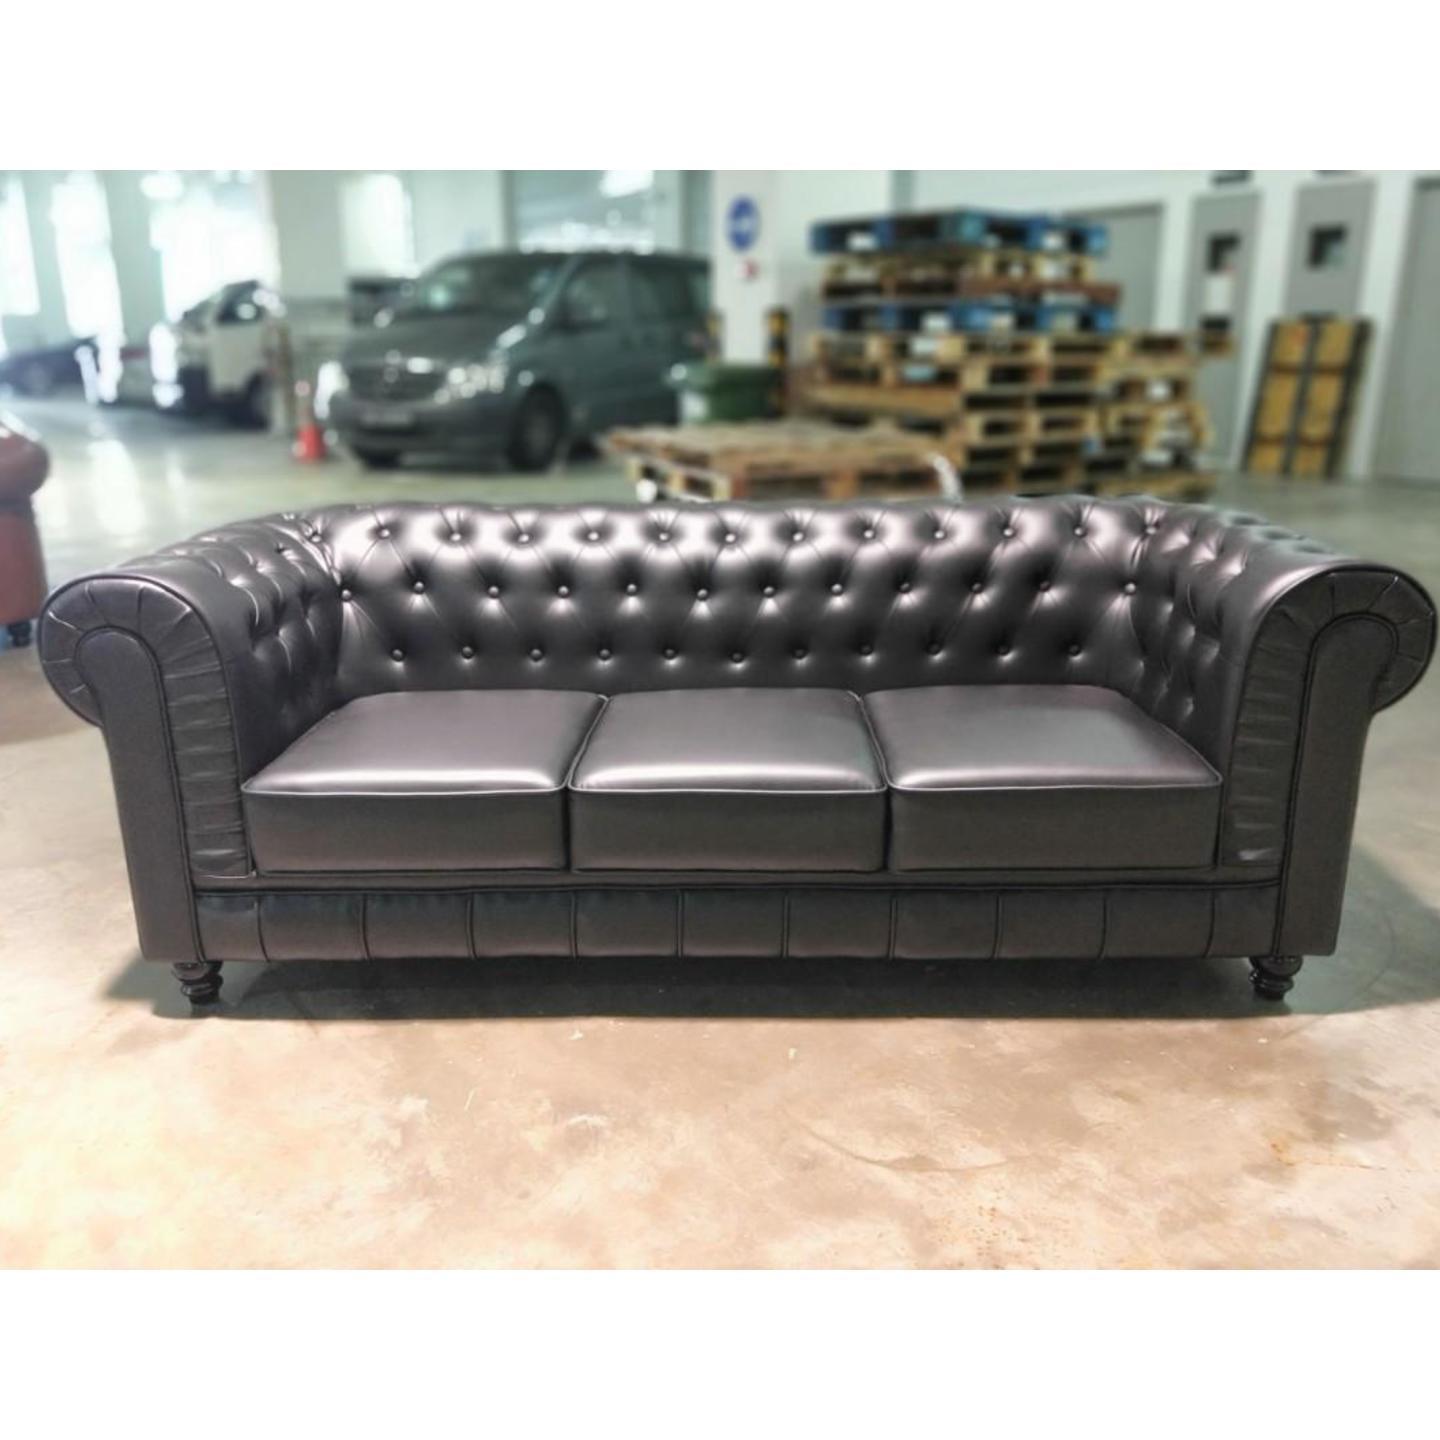 PRE ORDER SALVADO II 3 SeATER Chesterfield Sofa in MATTE BLACK PU - Estimated Delivery by End June 2022